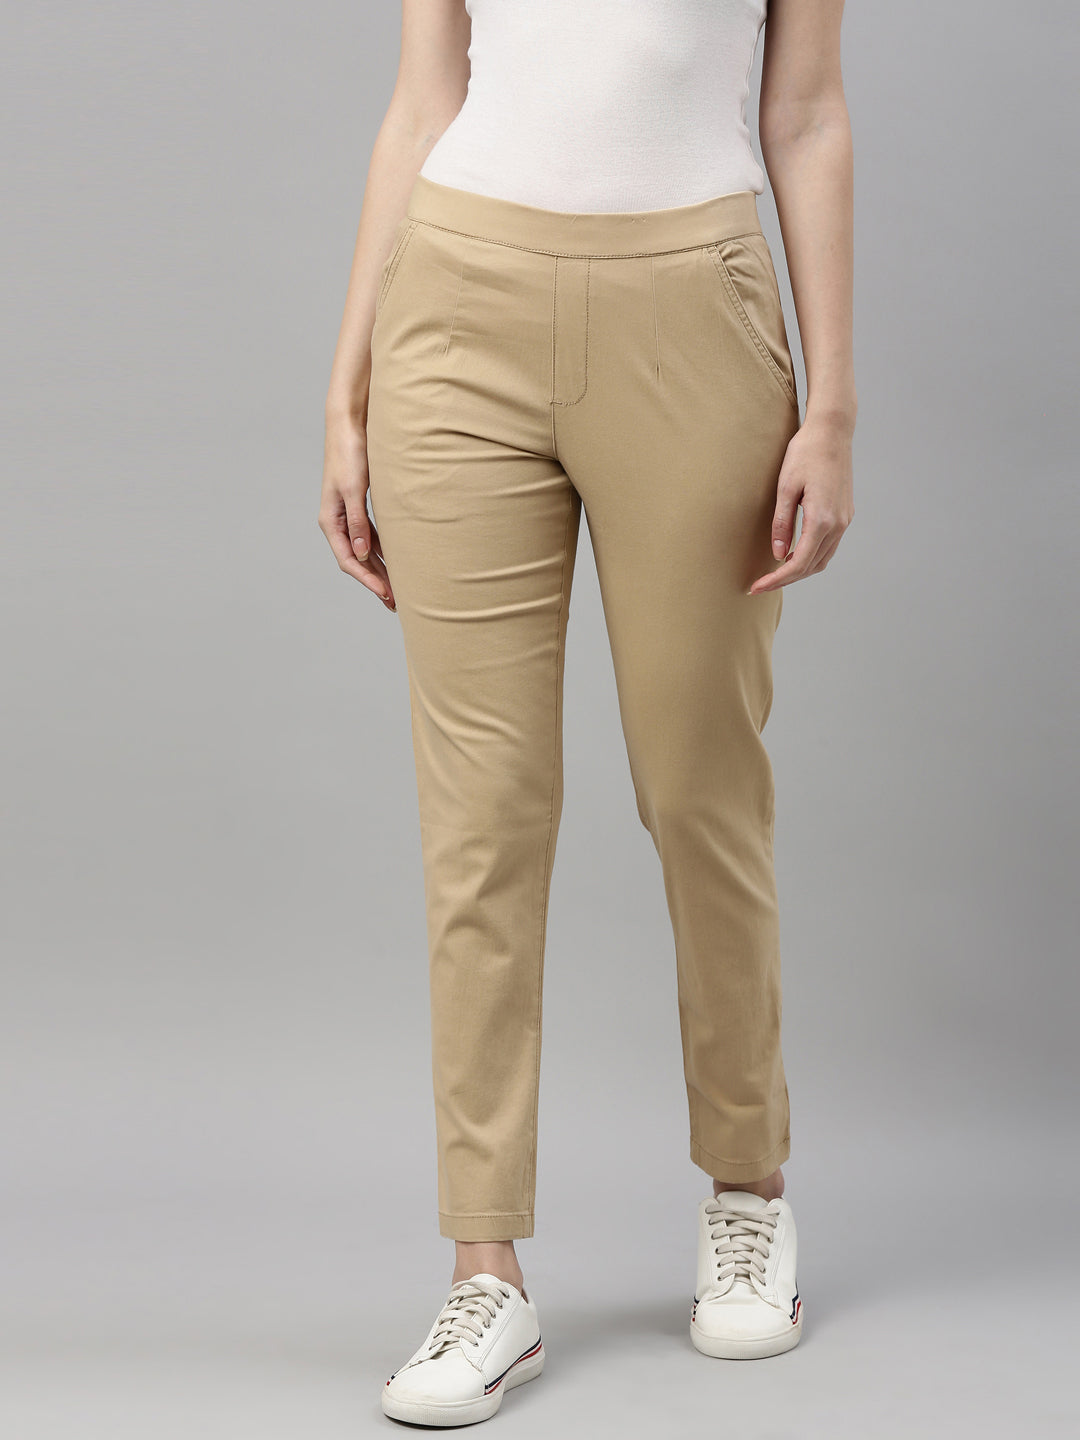 Ladies Classical Ninth Trousers Women Woven Functional Fly Stretch Pants -  China Pants and Woven Ladies Pants price | Made-in-China.com